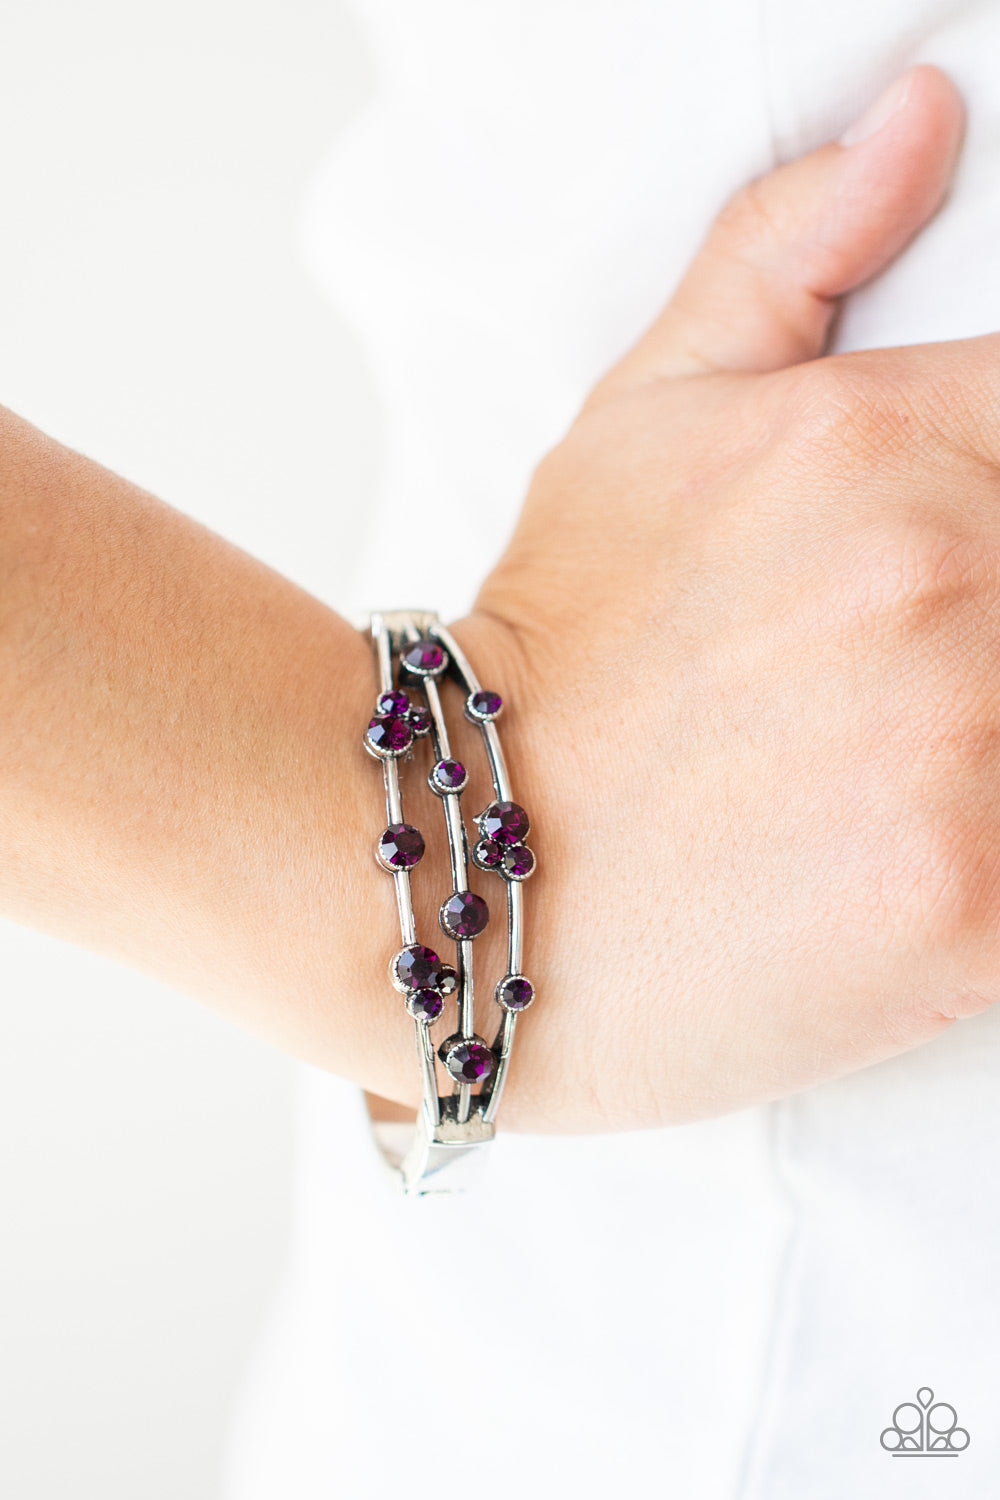 Cosmic Candescence - Purple and Silver Hinge Closure Bracelet - Paparazzi Accessories - 
A smattering of glittery purple rhinestones adorn three silver bars that coalesce into a versatile silver cuff-like bangle around the wrist. Features a hinged closure. Sold as one individual bracelet.
